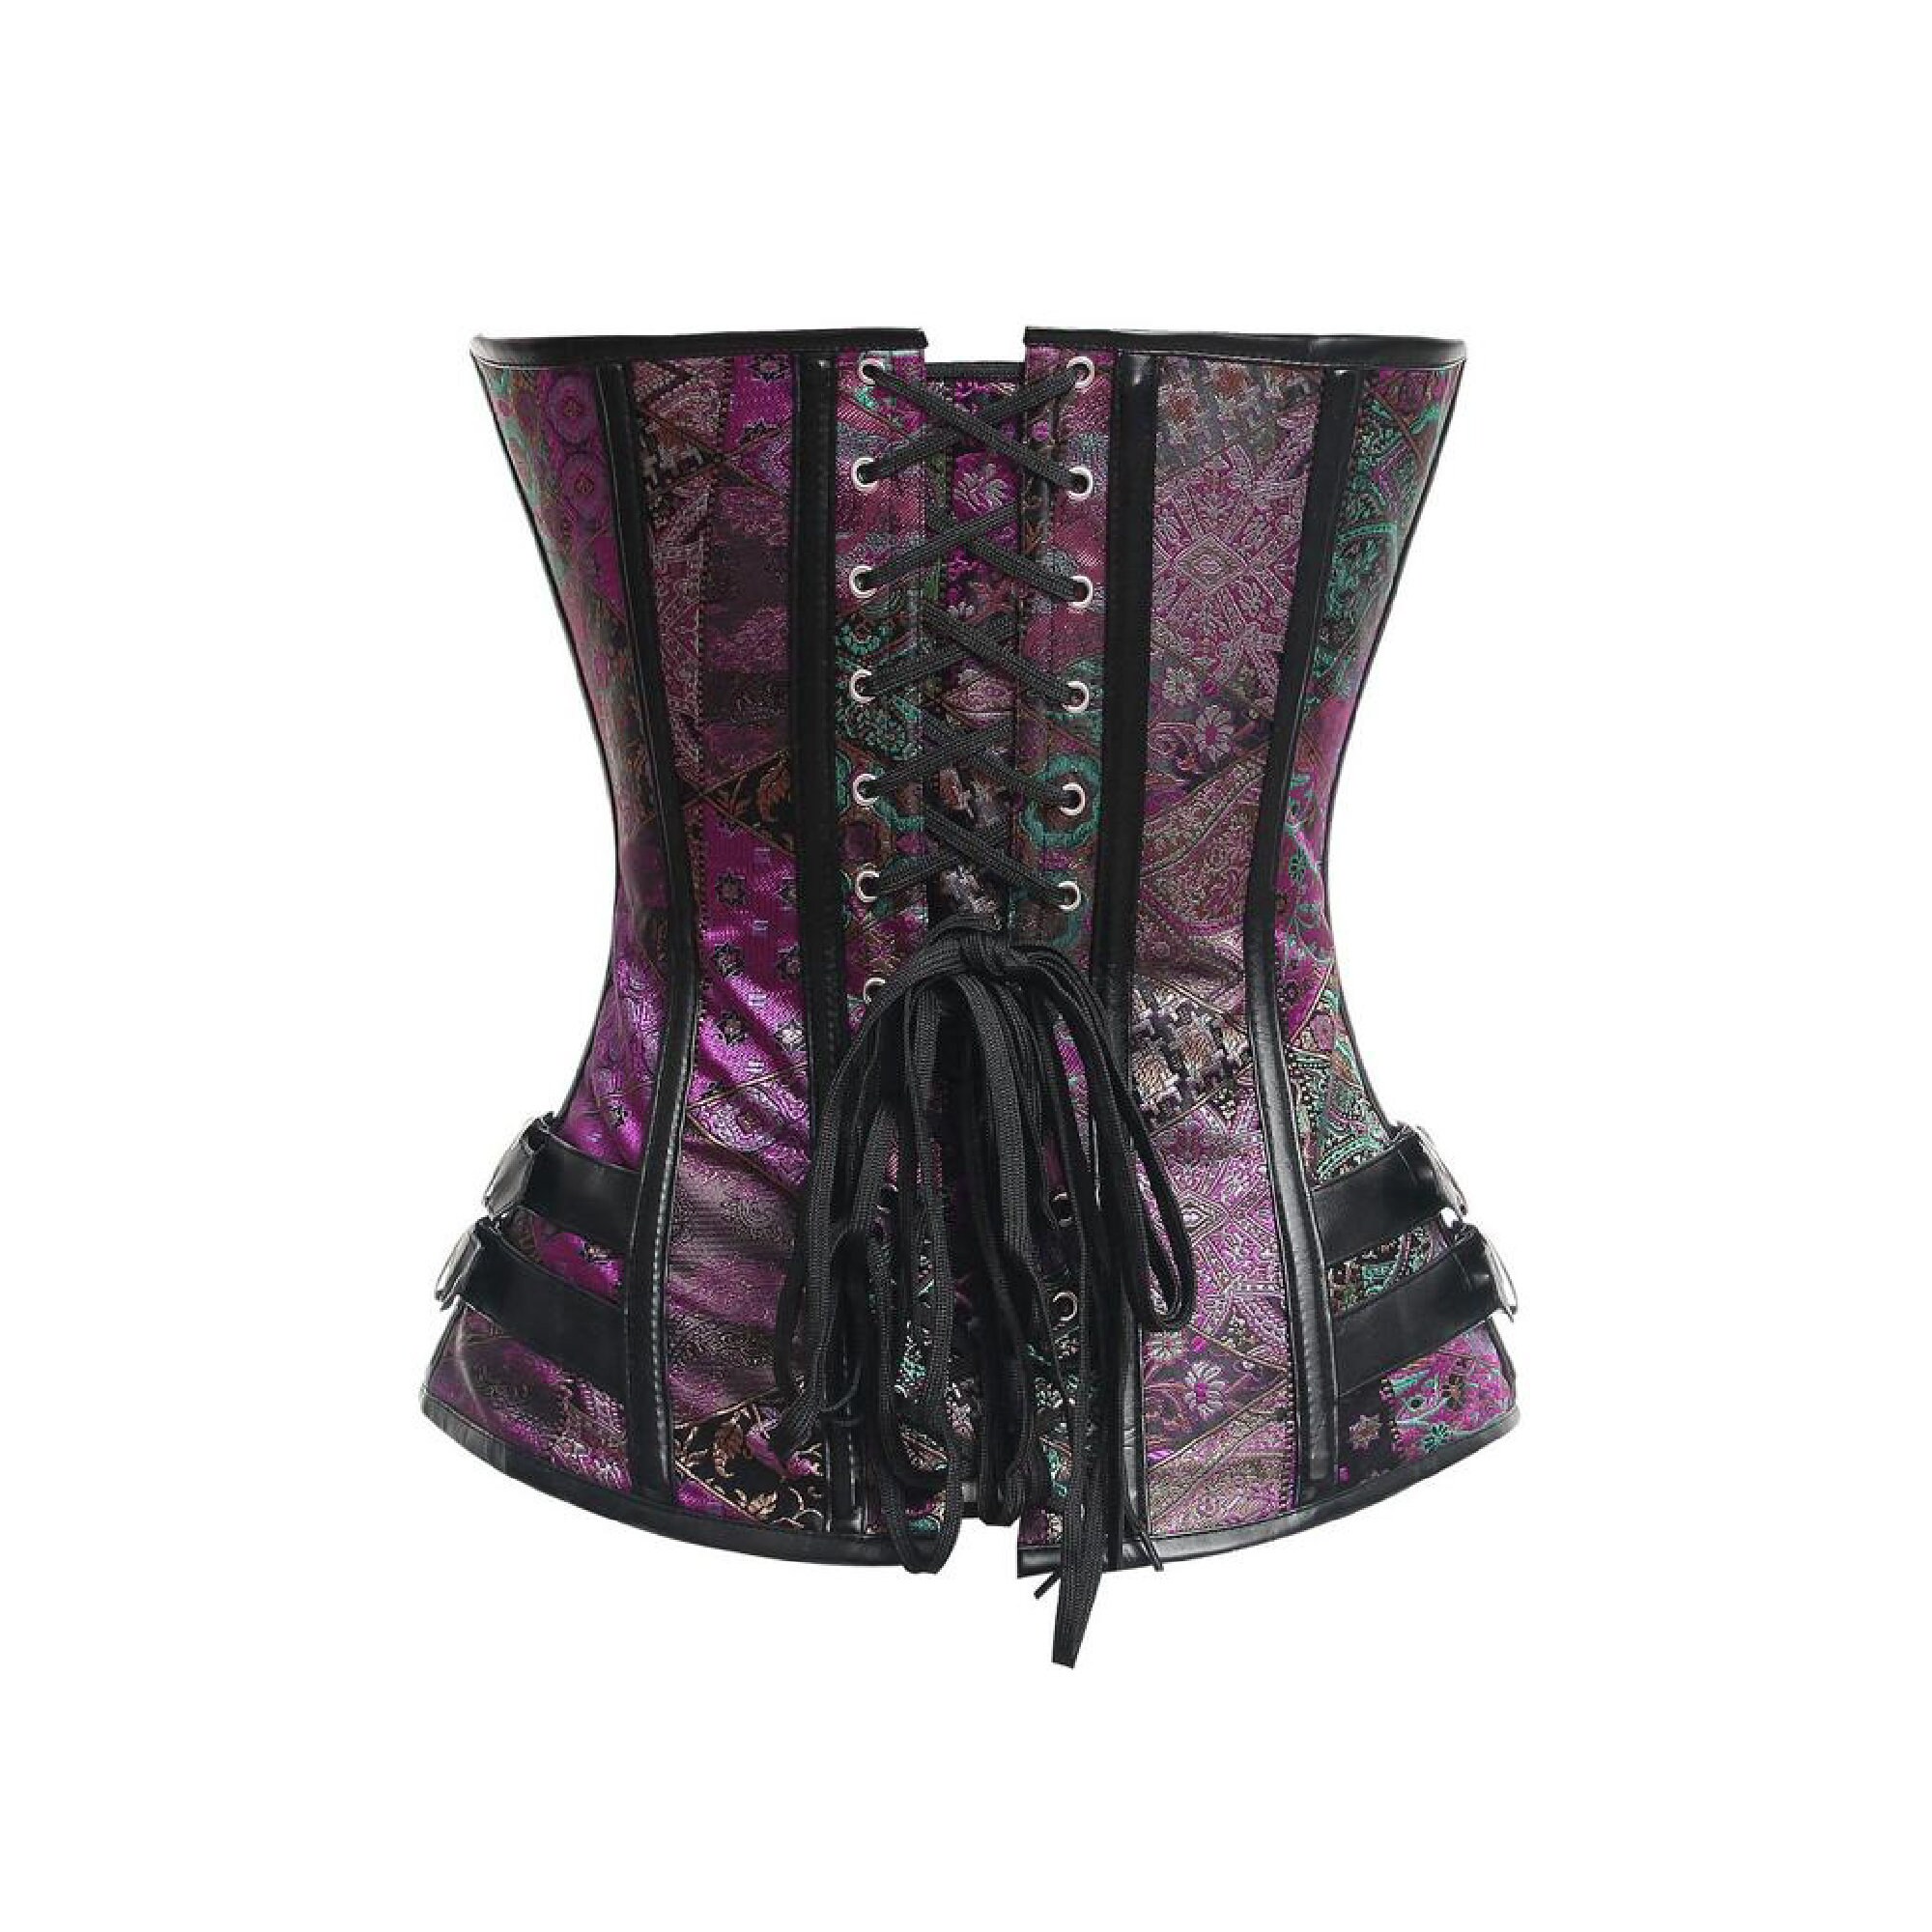 Purple brocade steampunk corset with buckles cosplay costume | Etsy